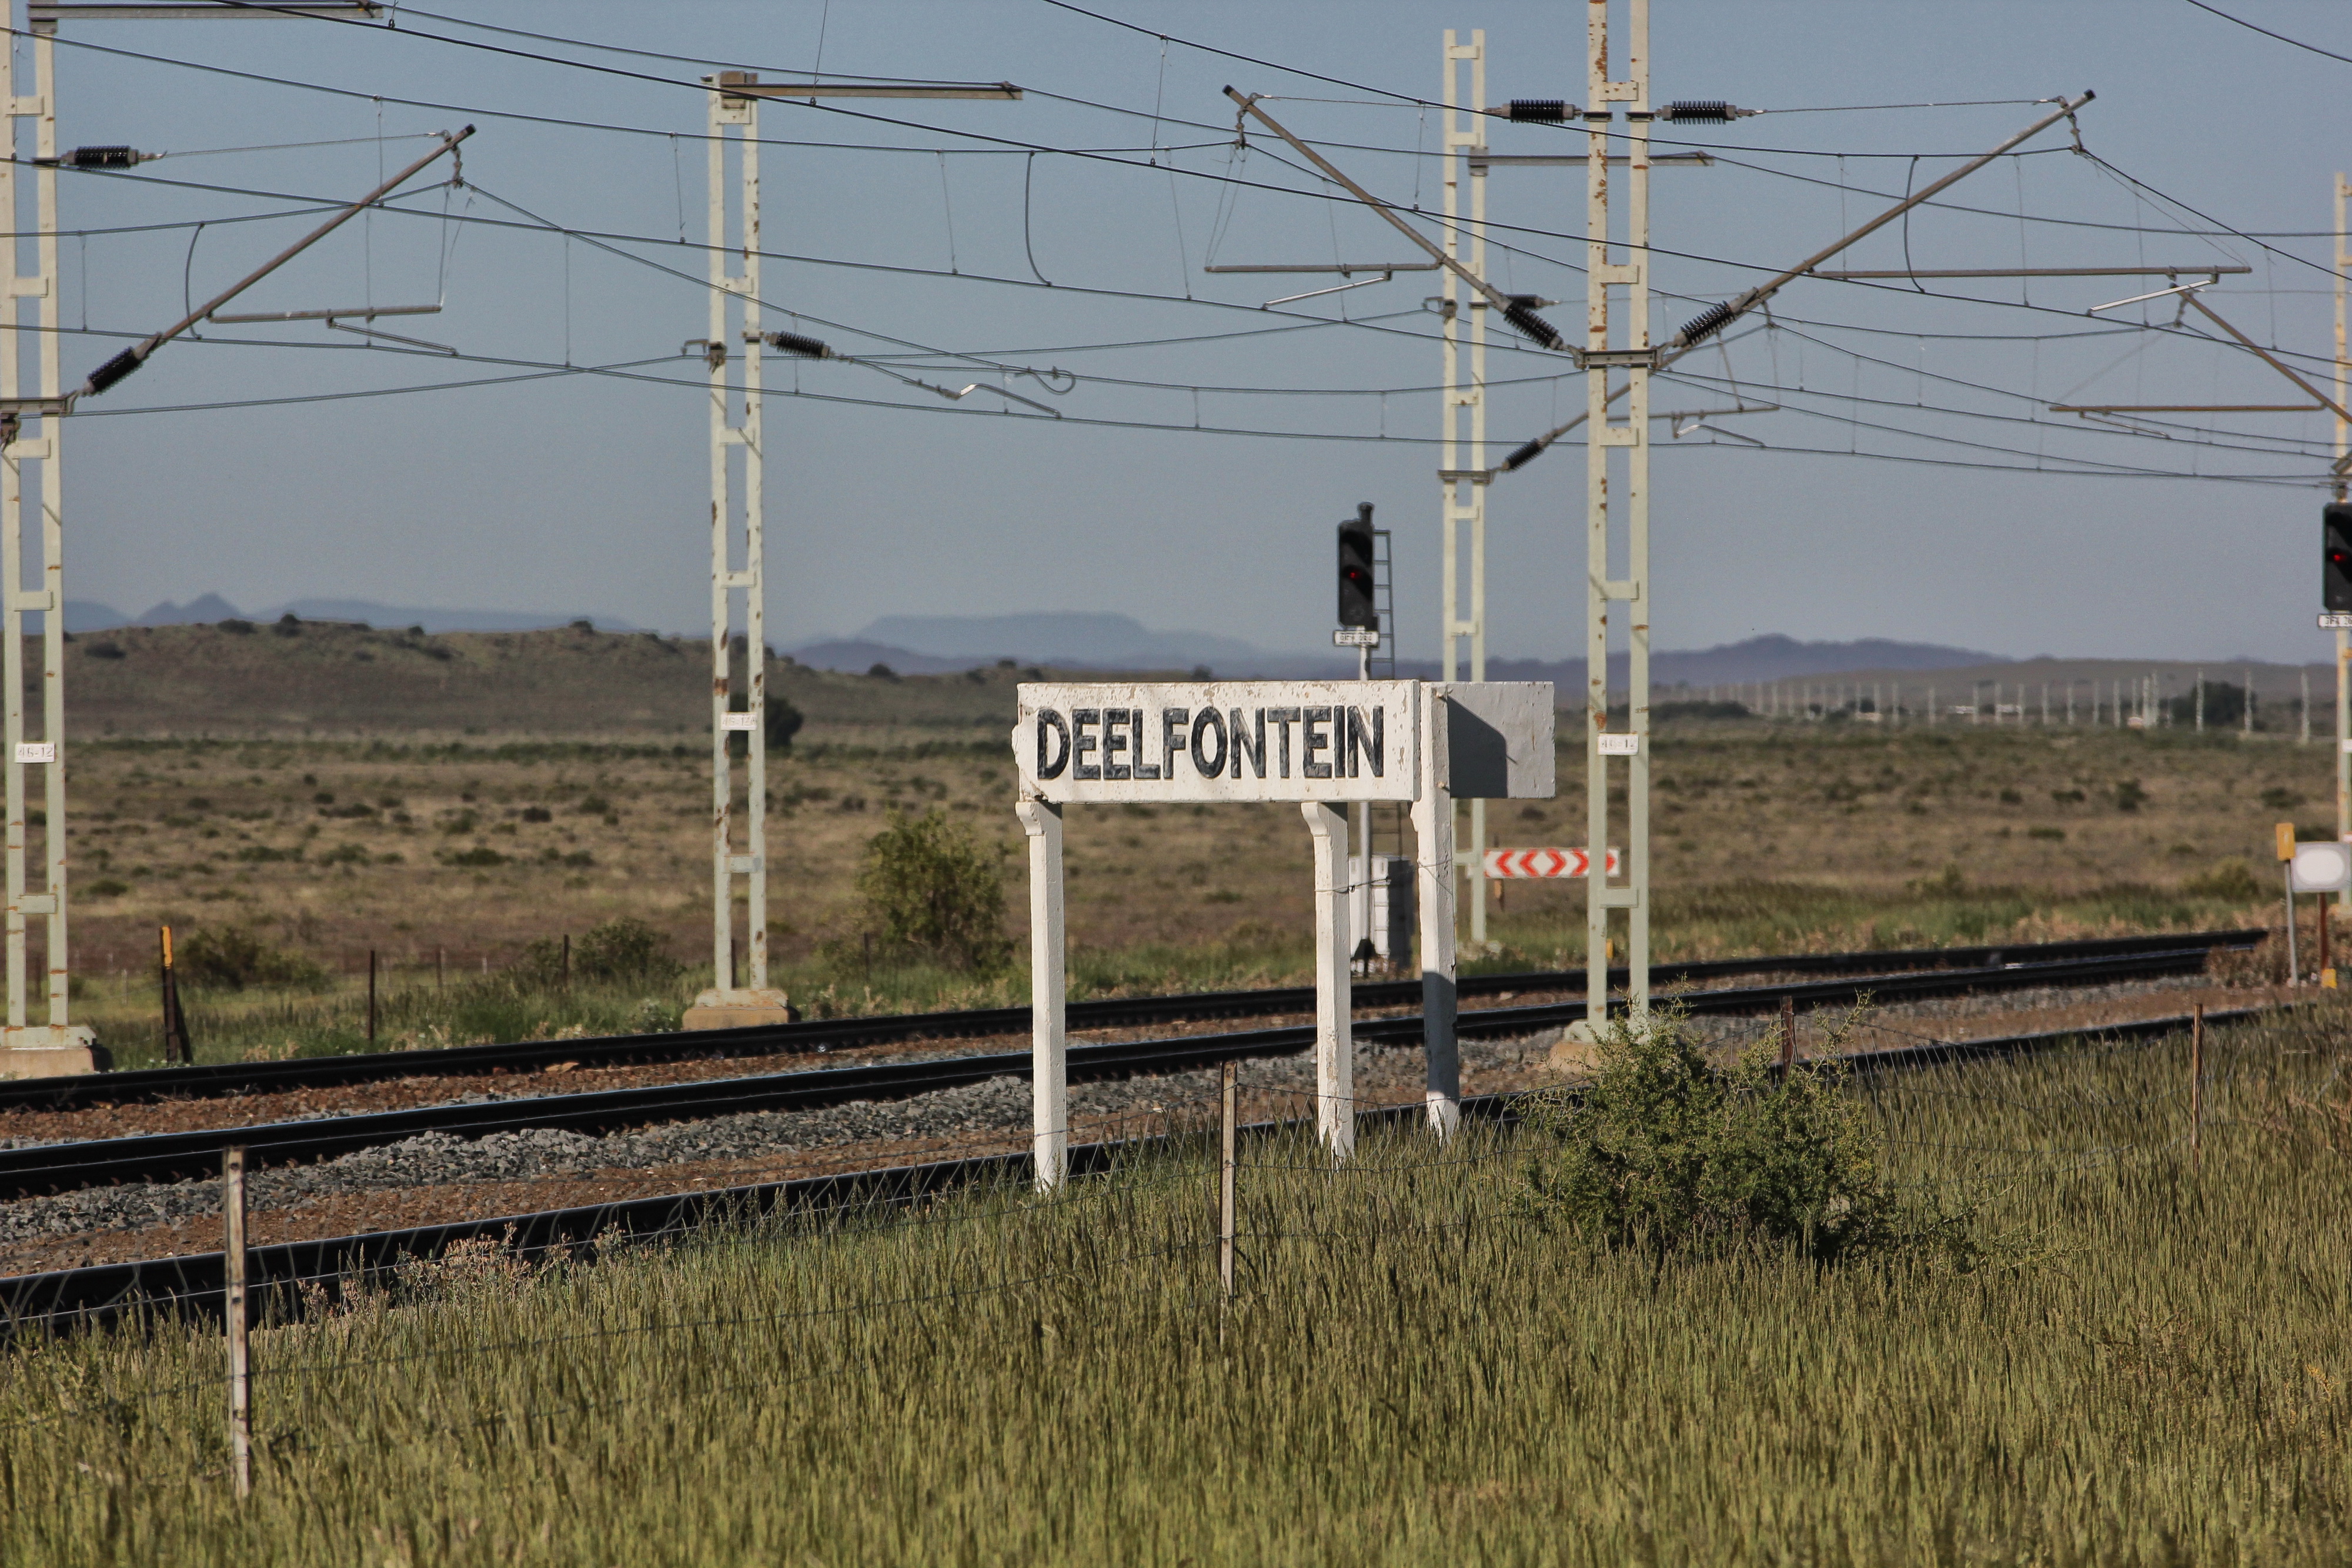 Deelfontein Siding – once a hive of military activity as battlefield casualties were dropped off at the military field hospital.